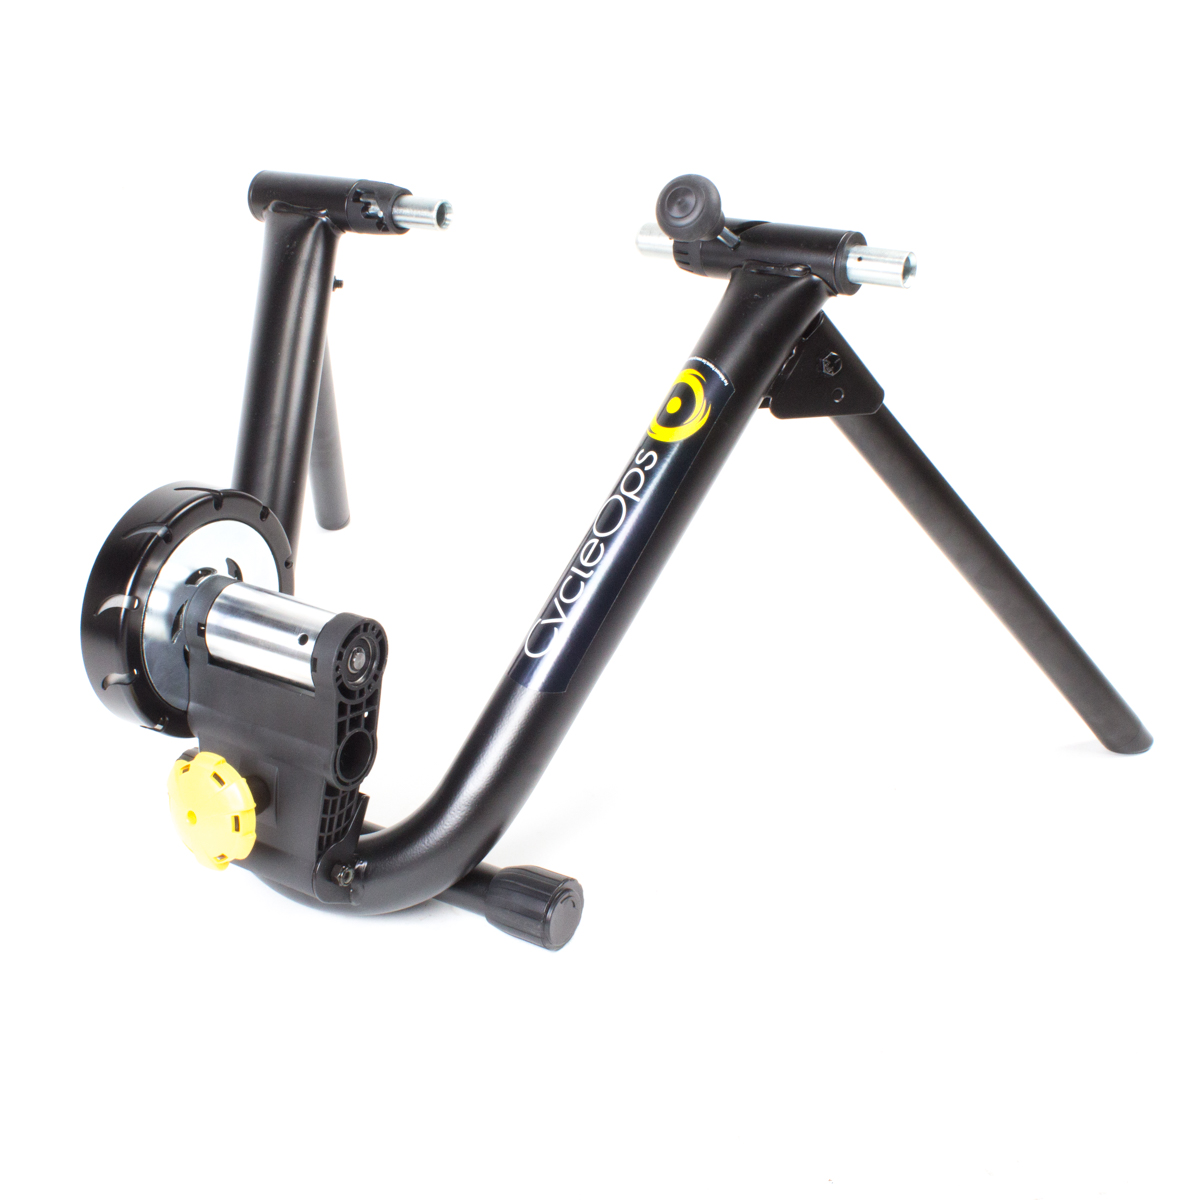 CycleOps Magneto Indoor Cycling Trainer - 8B NC CC1210 1